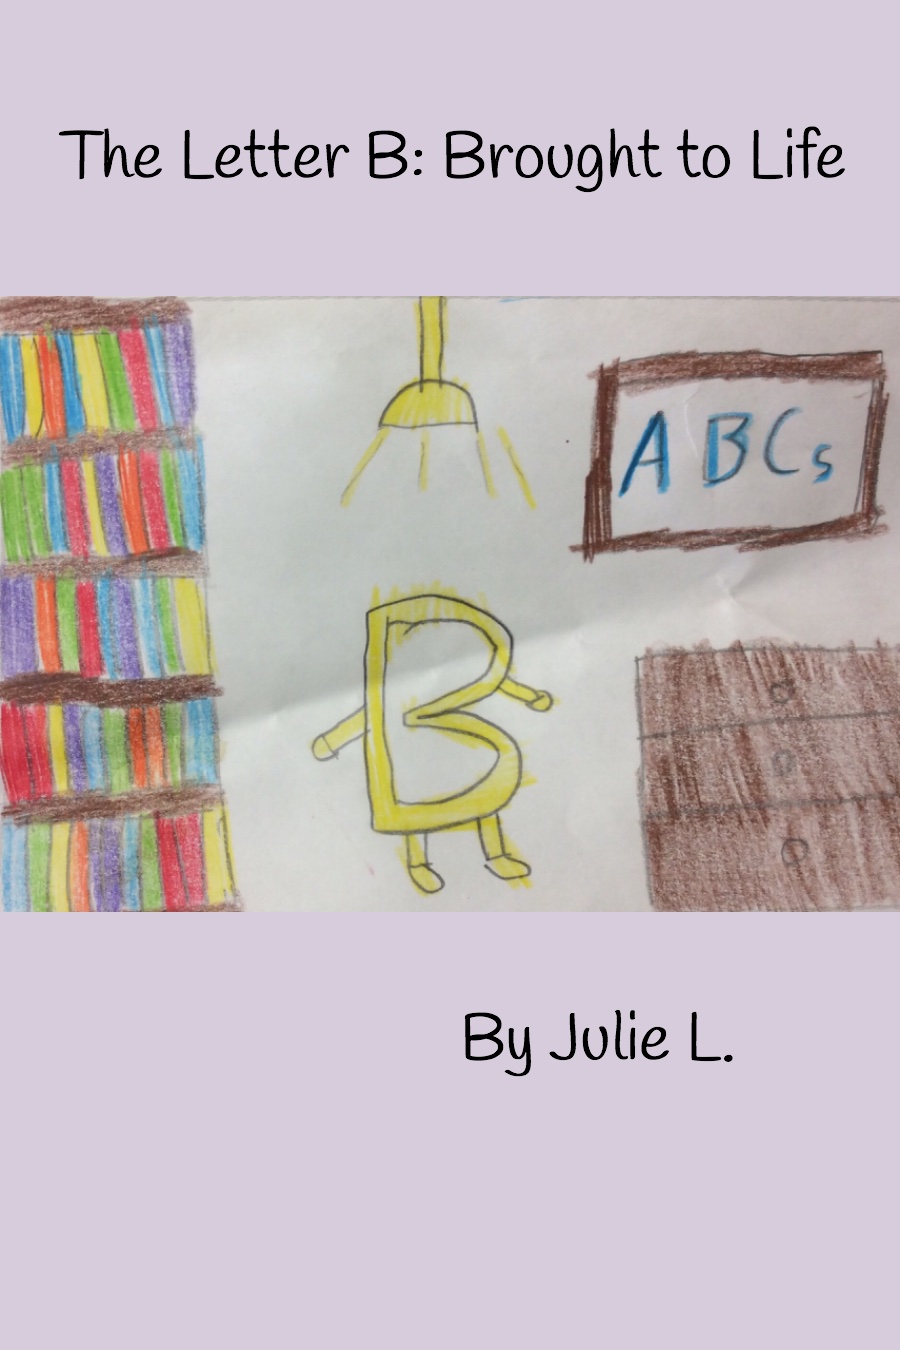 The Letter B Brought to Life by Julie L